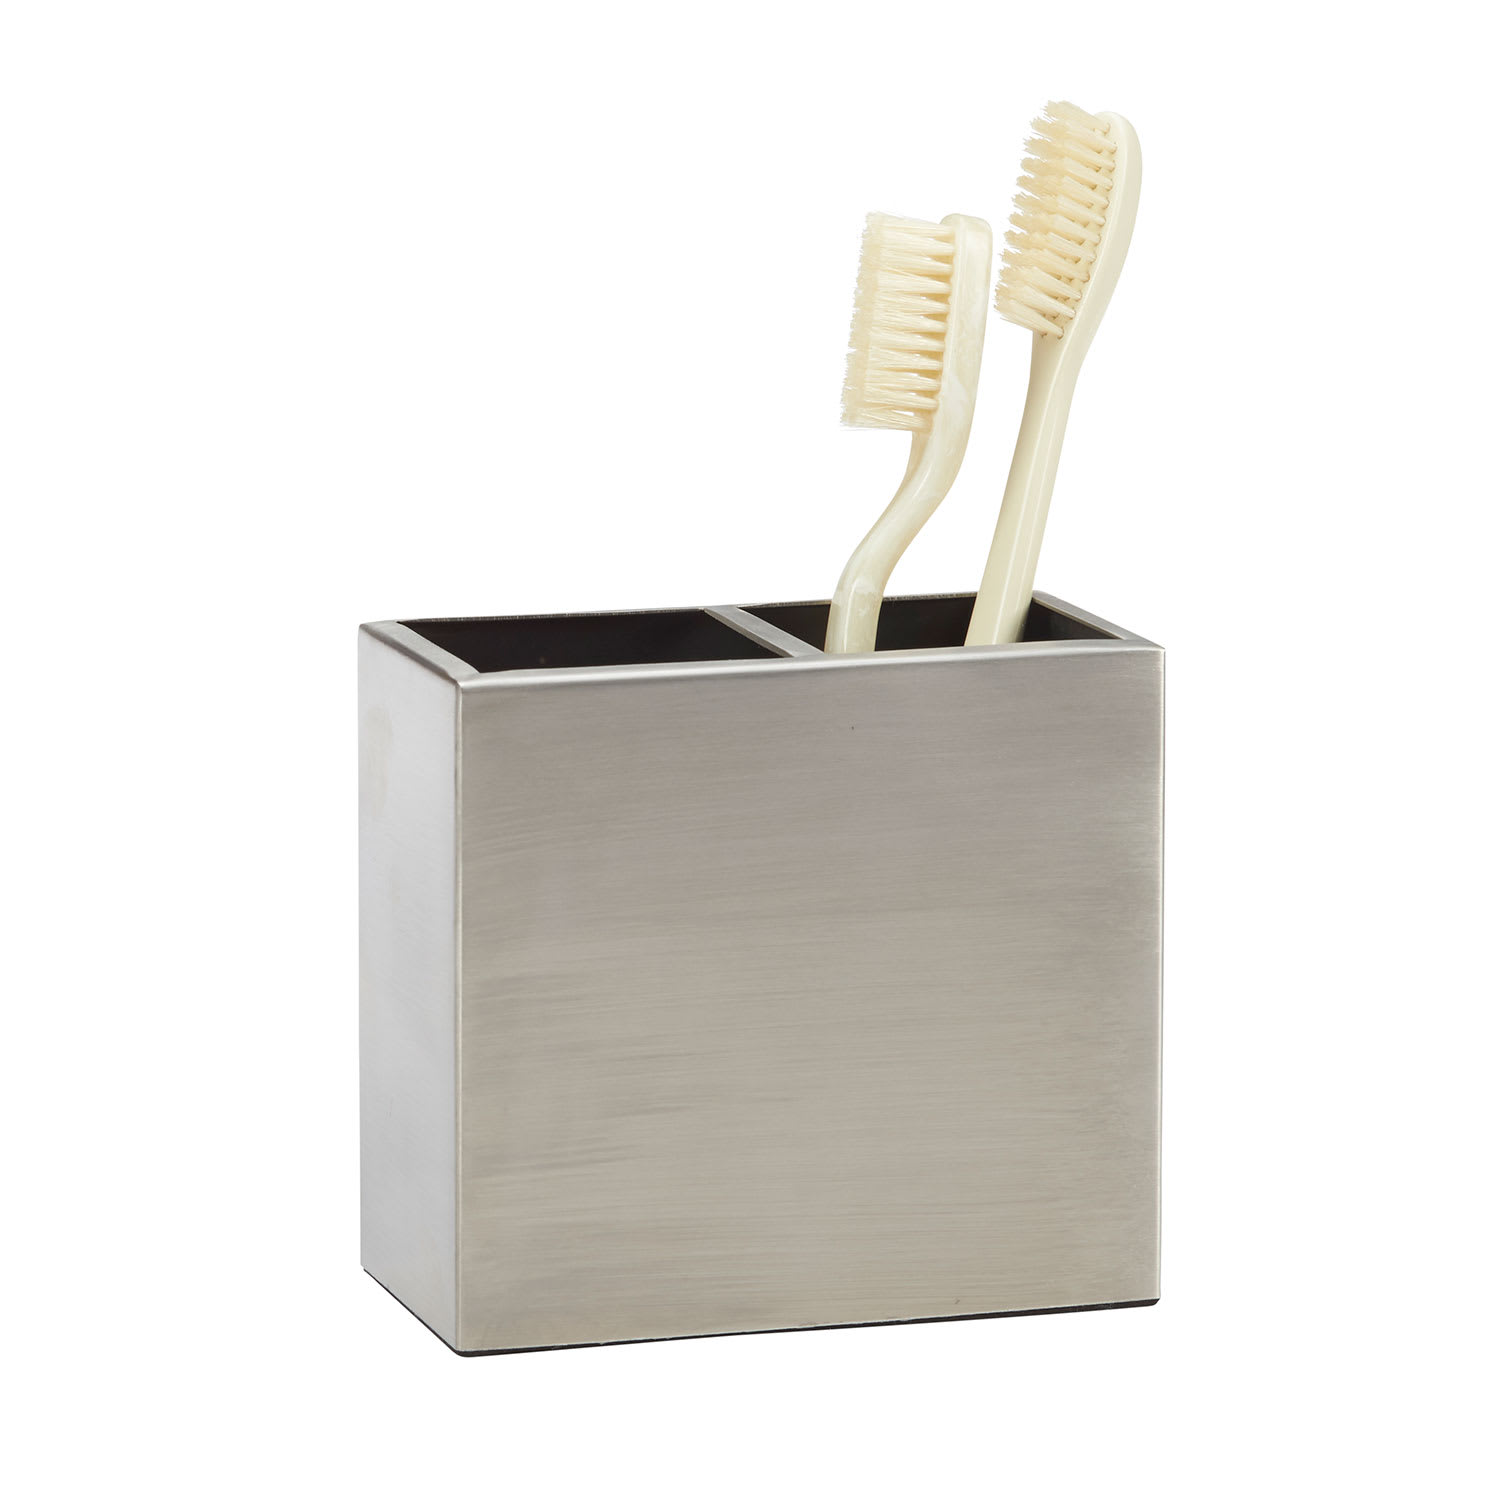 Stainless Steel Cubed Bath Toothbrush Holder - Stainless Steel